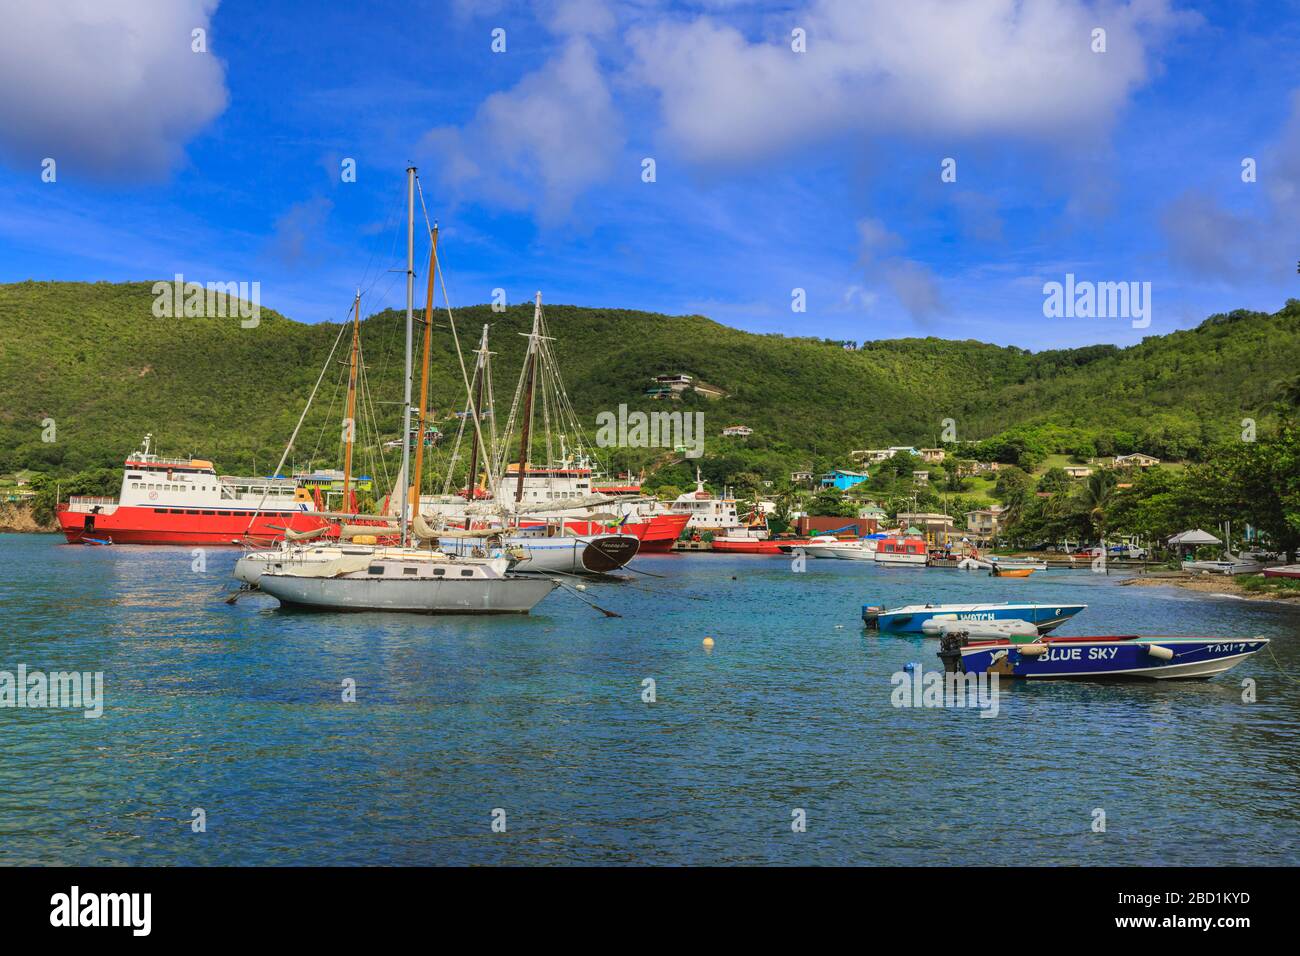 Quiet Caribbean, beautiful Port Elizabeth, Admiralty Bay, Bequia, The Grenadines, St. Vincent and The Grenadines, Windward Islands, Caribbean Stock Photo